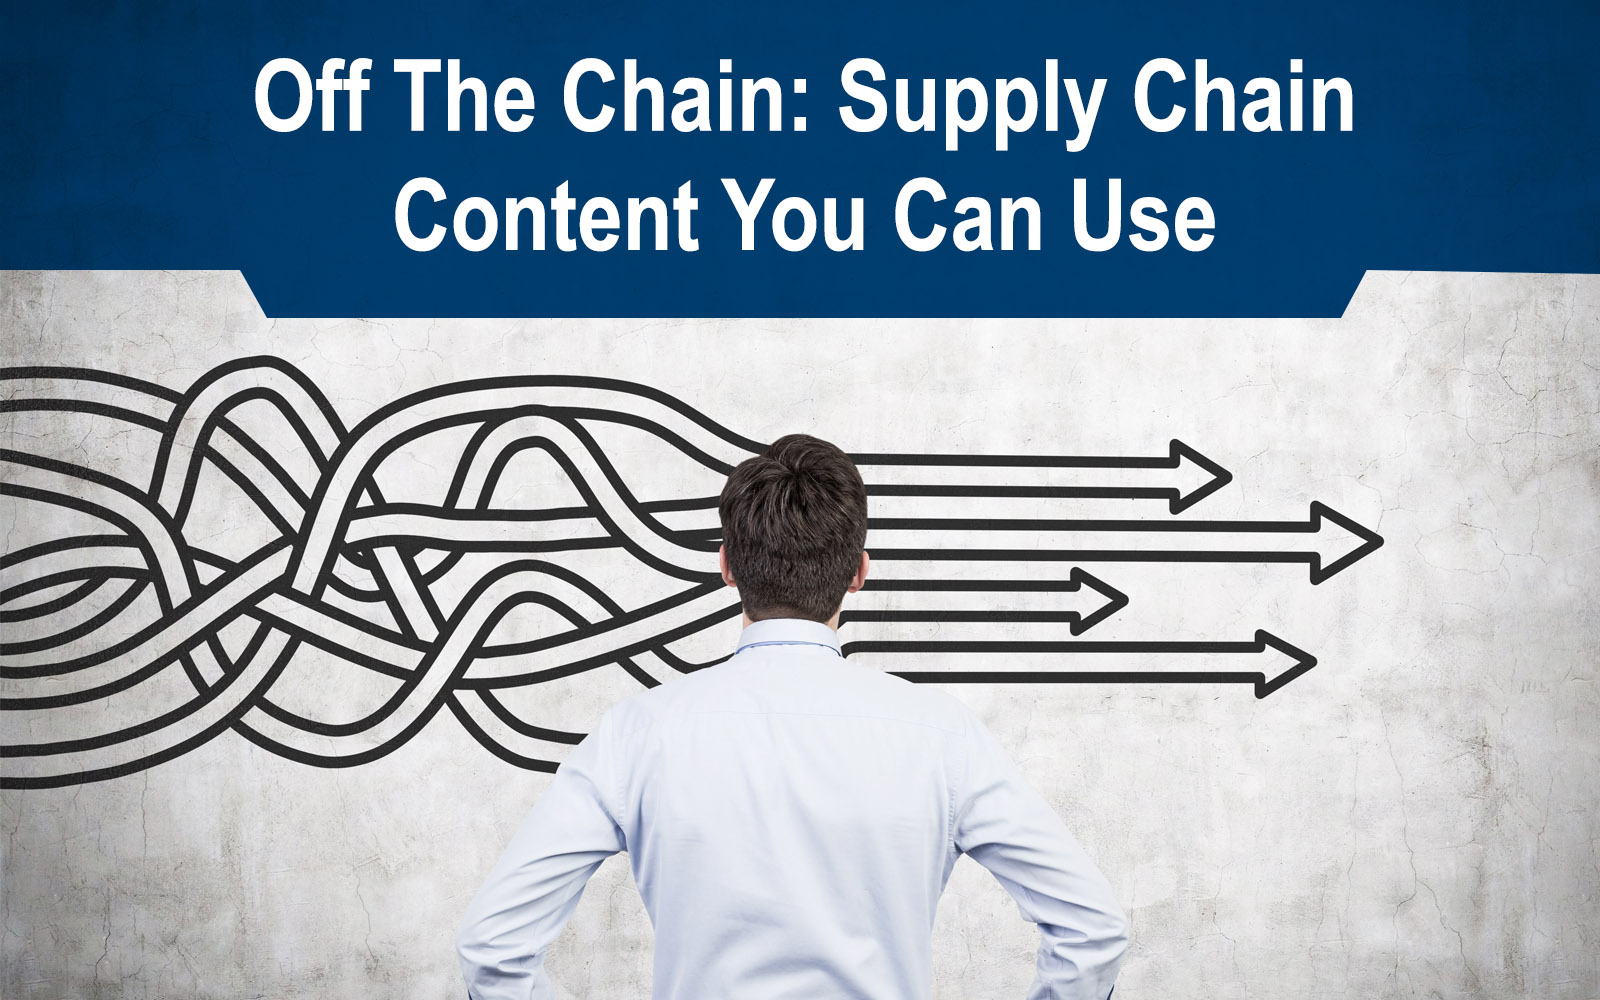 Off the Chain: Supply Chain Content You Can Use